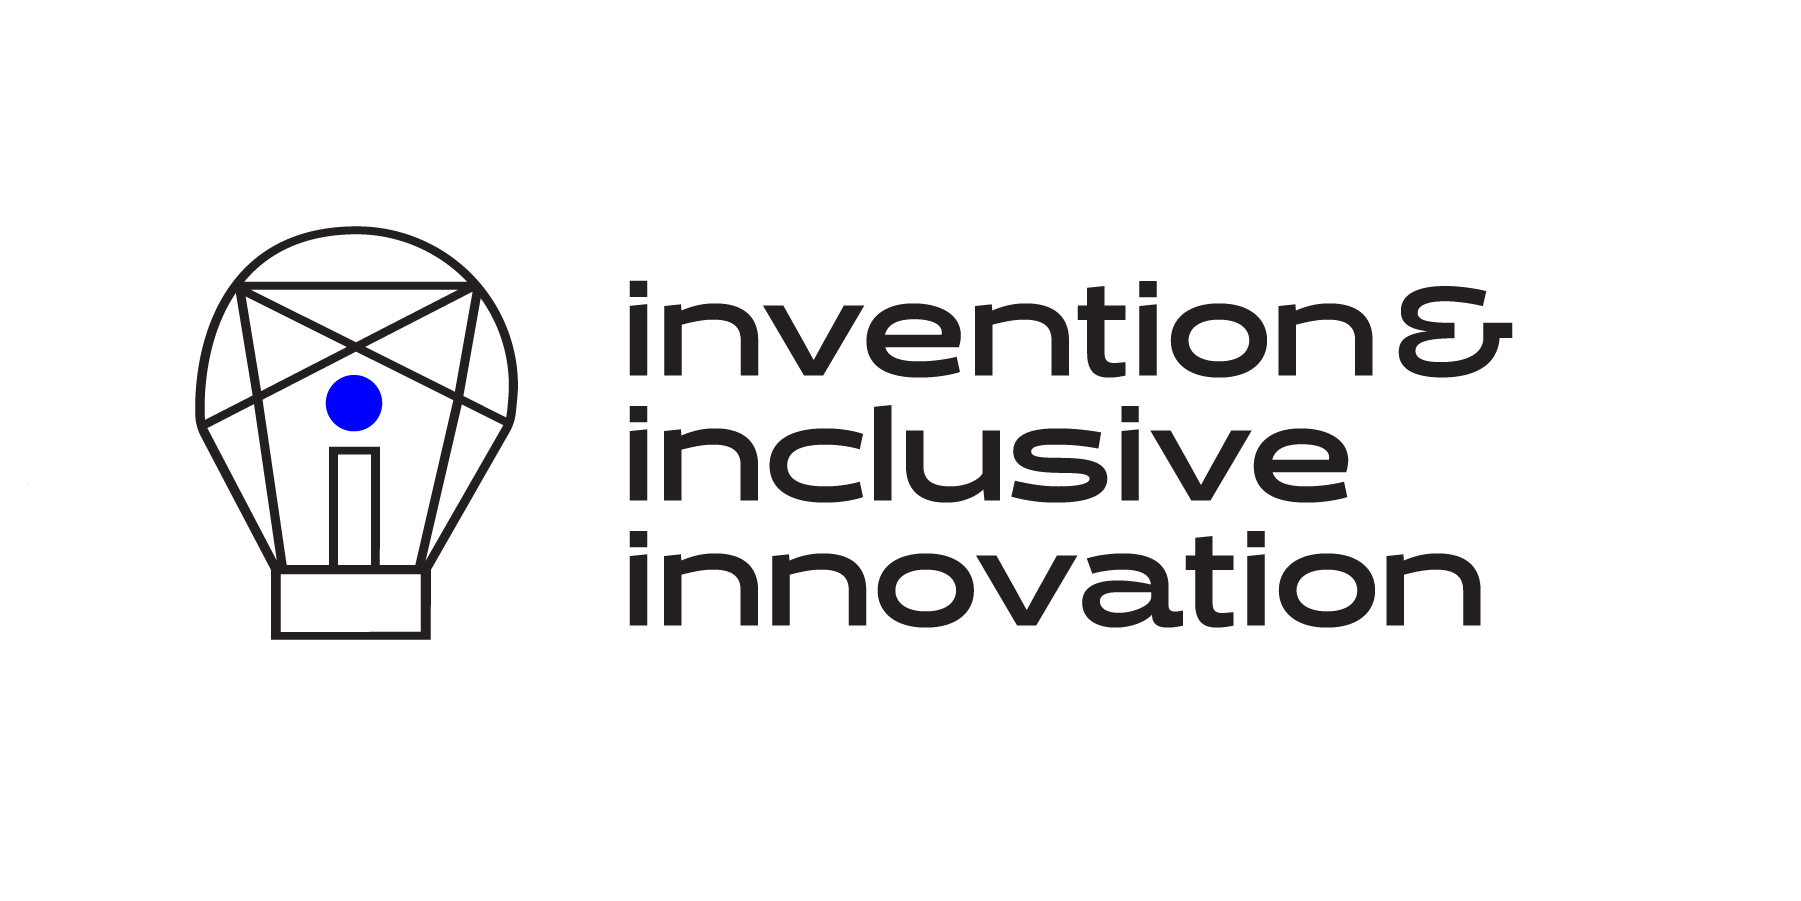 i3 logo featuring a light bulb at the center of a geometric design